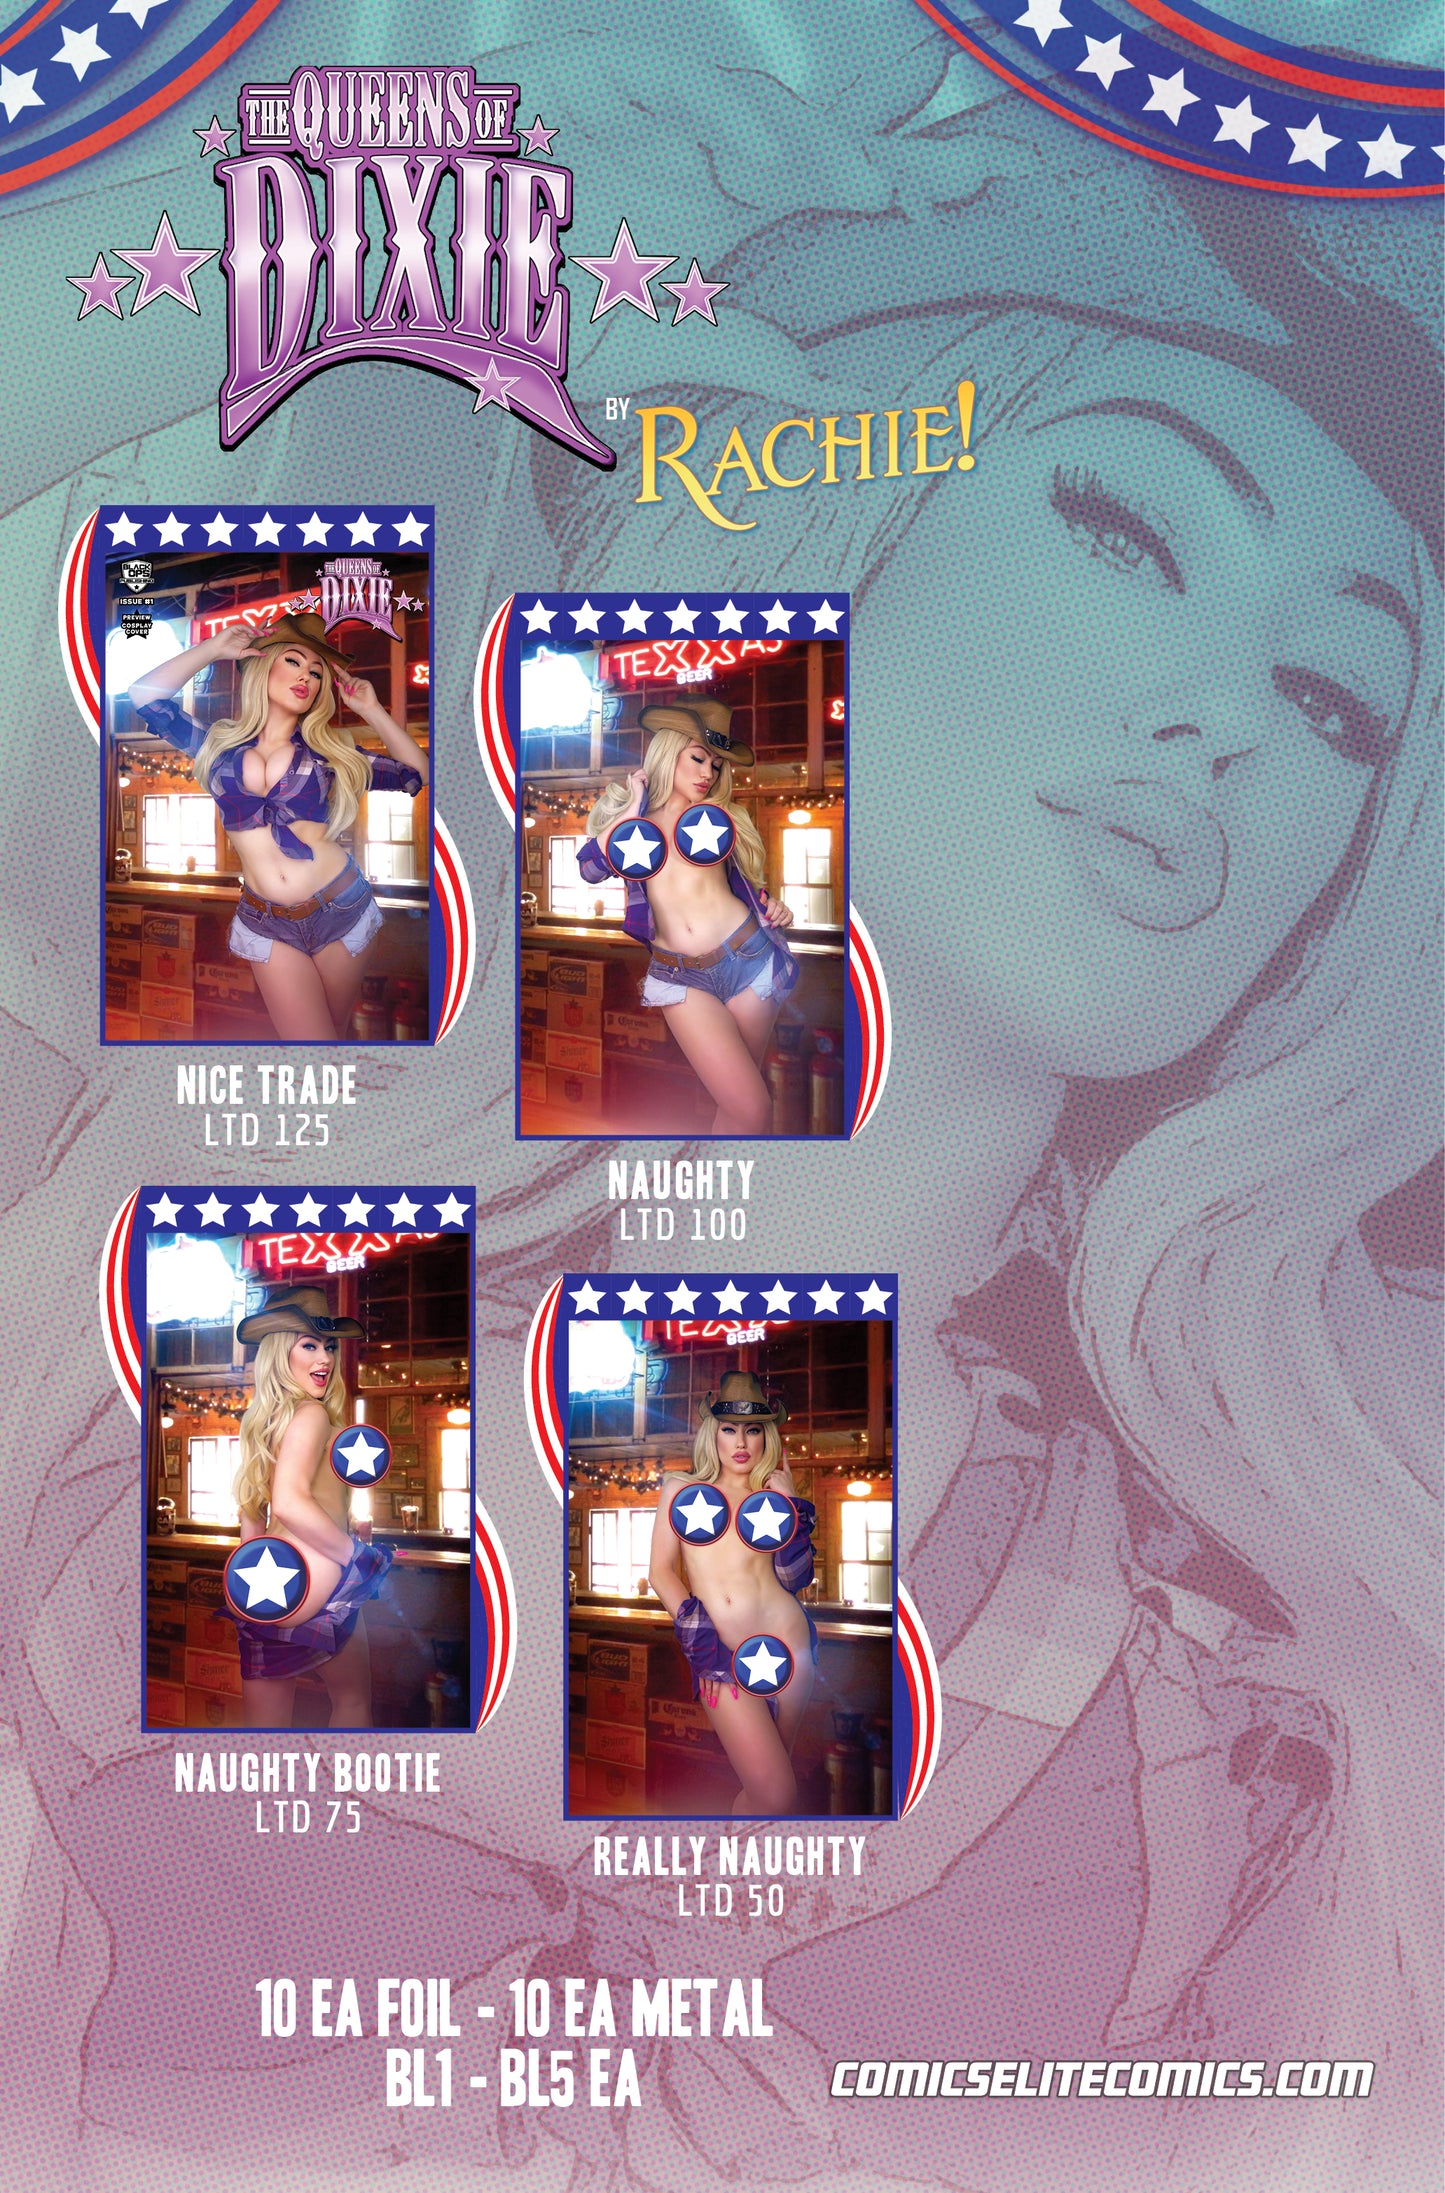 QUEENS OF DIXIE #1 PREVIEW - FACES BY RACHIE - NICE TRADE METAL LTD 10